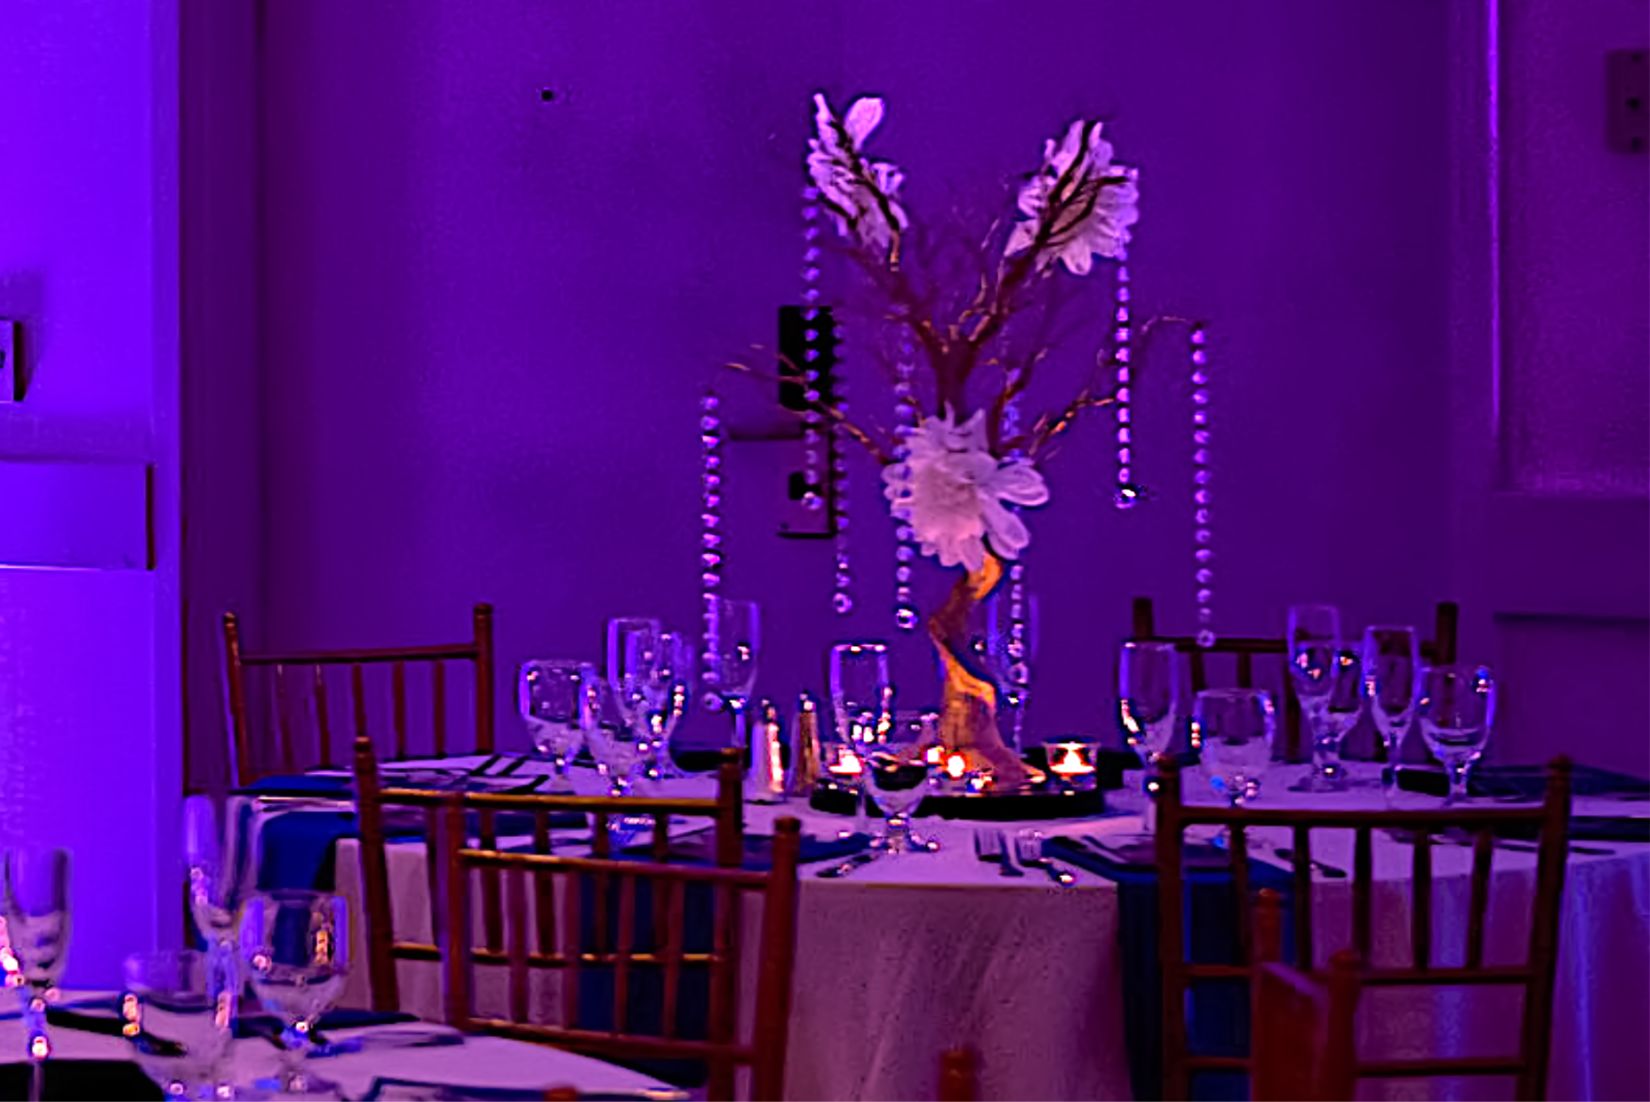 Beautiful gold manzanita tree centerpiece accented with white flowers and hanging crystals. Event decor features purple uplighting and chiavari chairs.